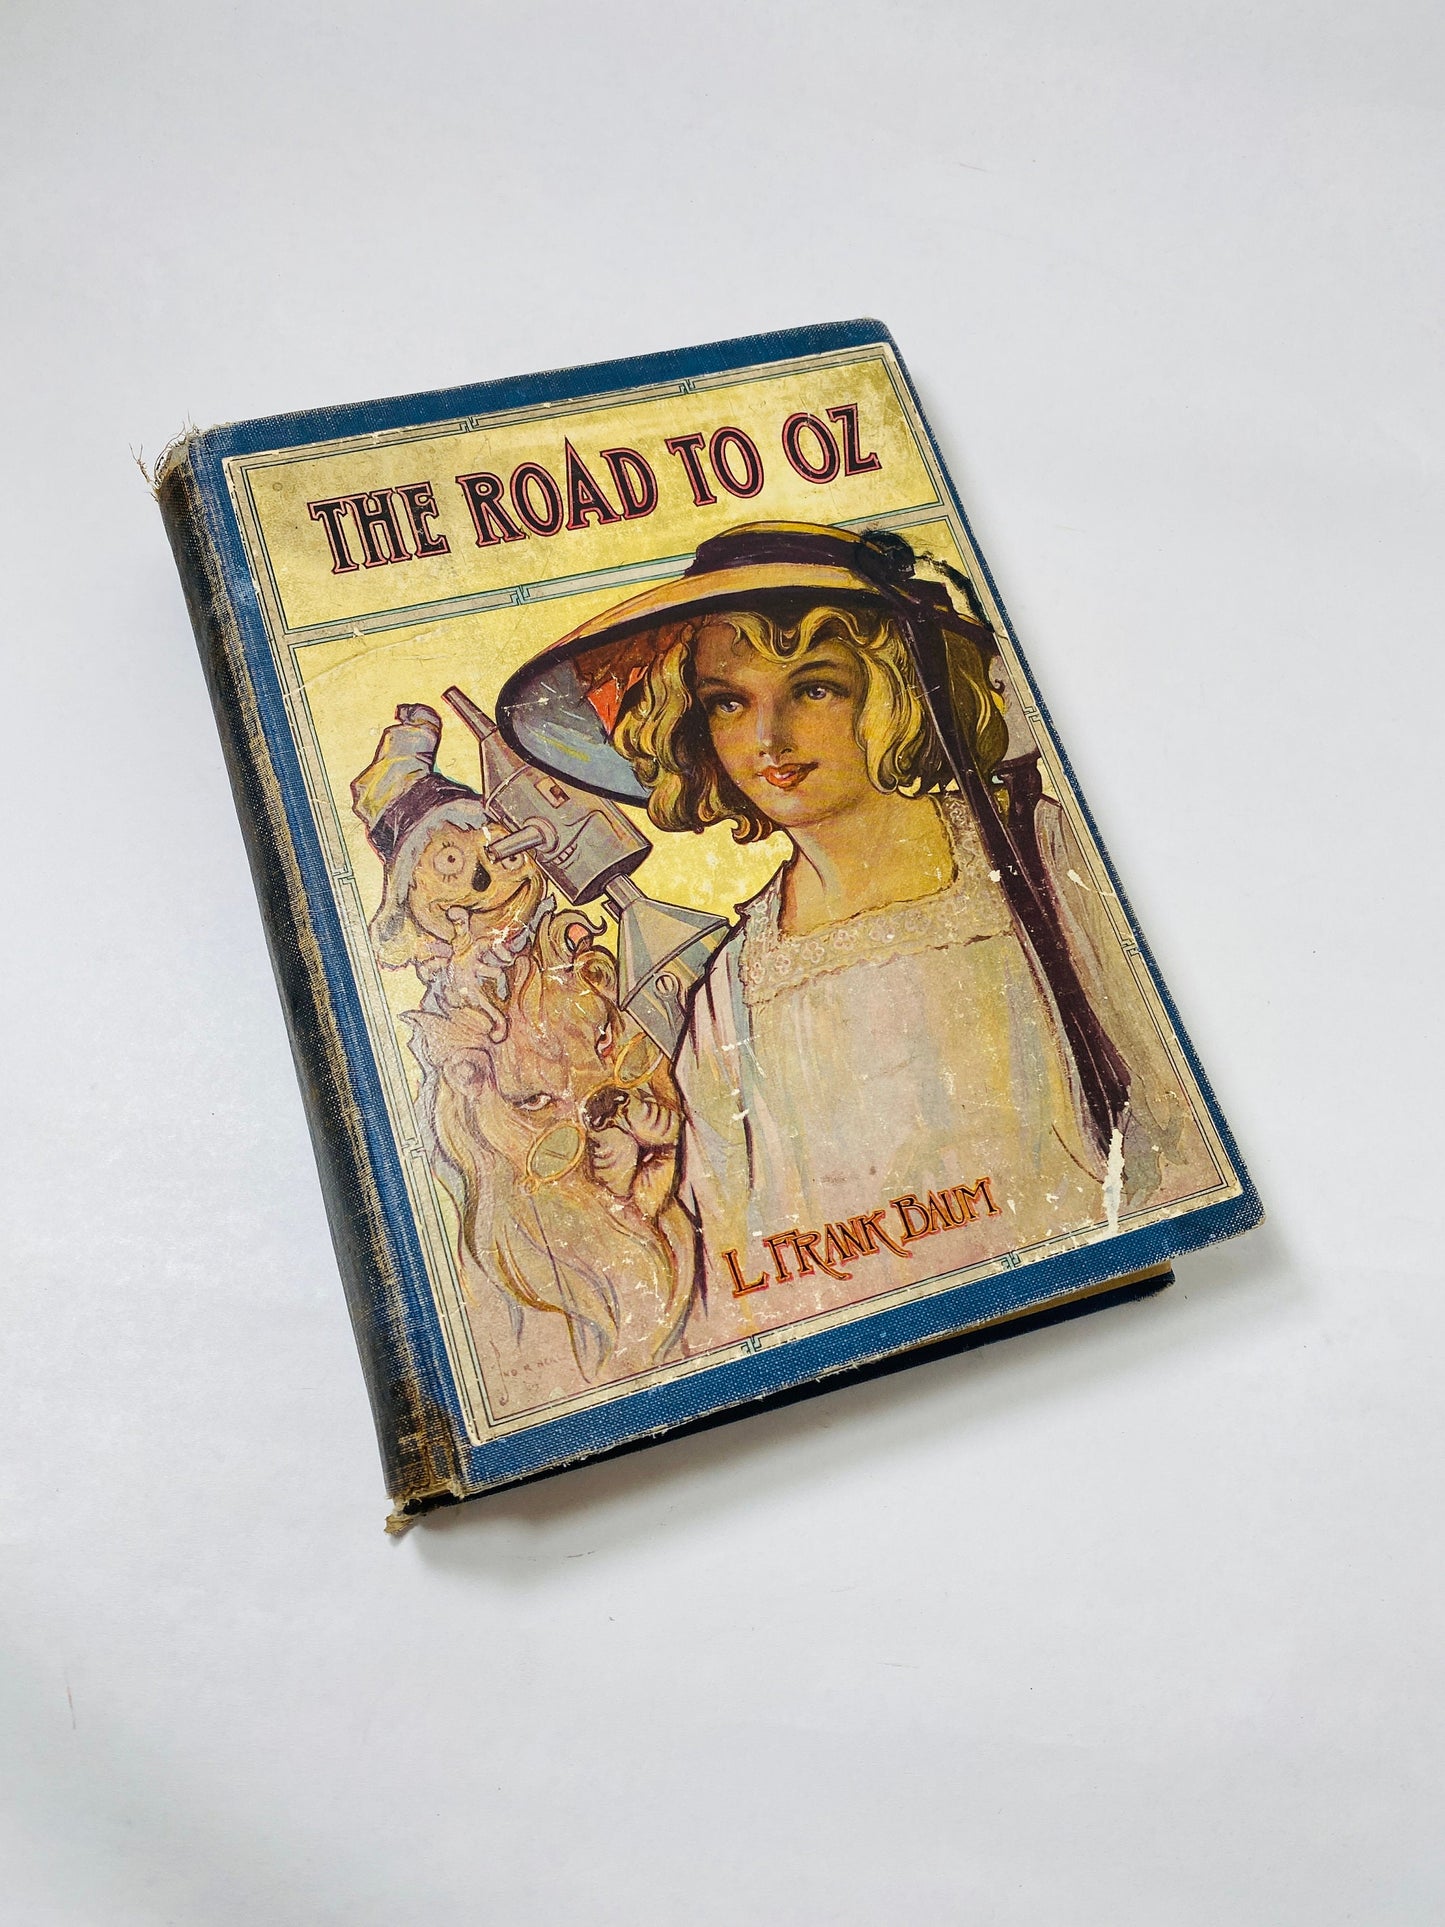 1909 antique Road to Oz vintage book by Frank Baum EARLY EDITION Wizard of Oz series adventure and love Reilly & Lee John R Neill